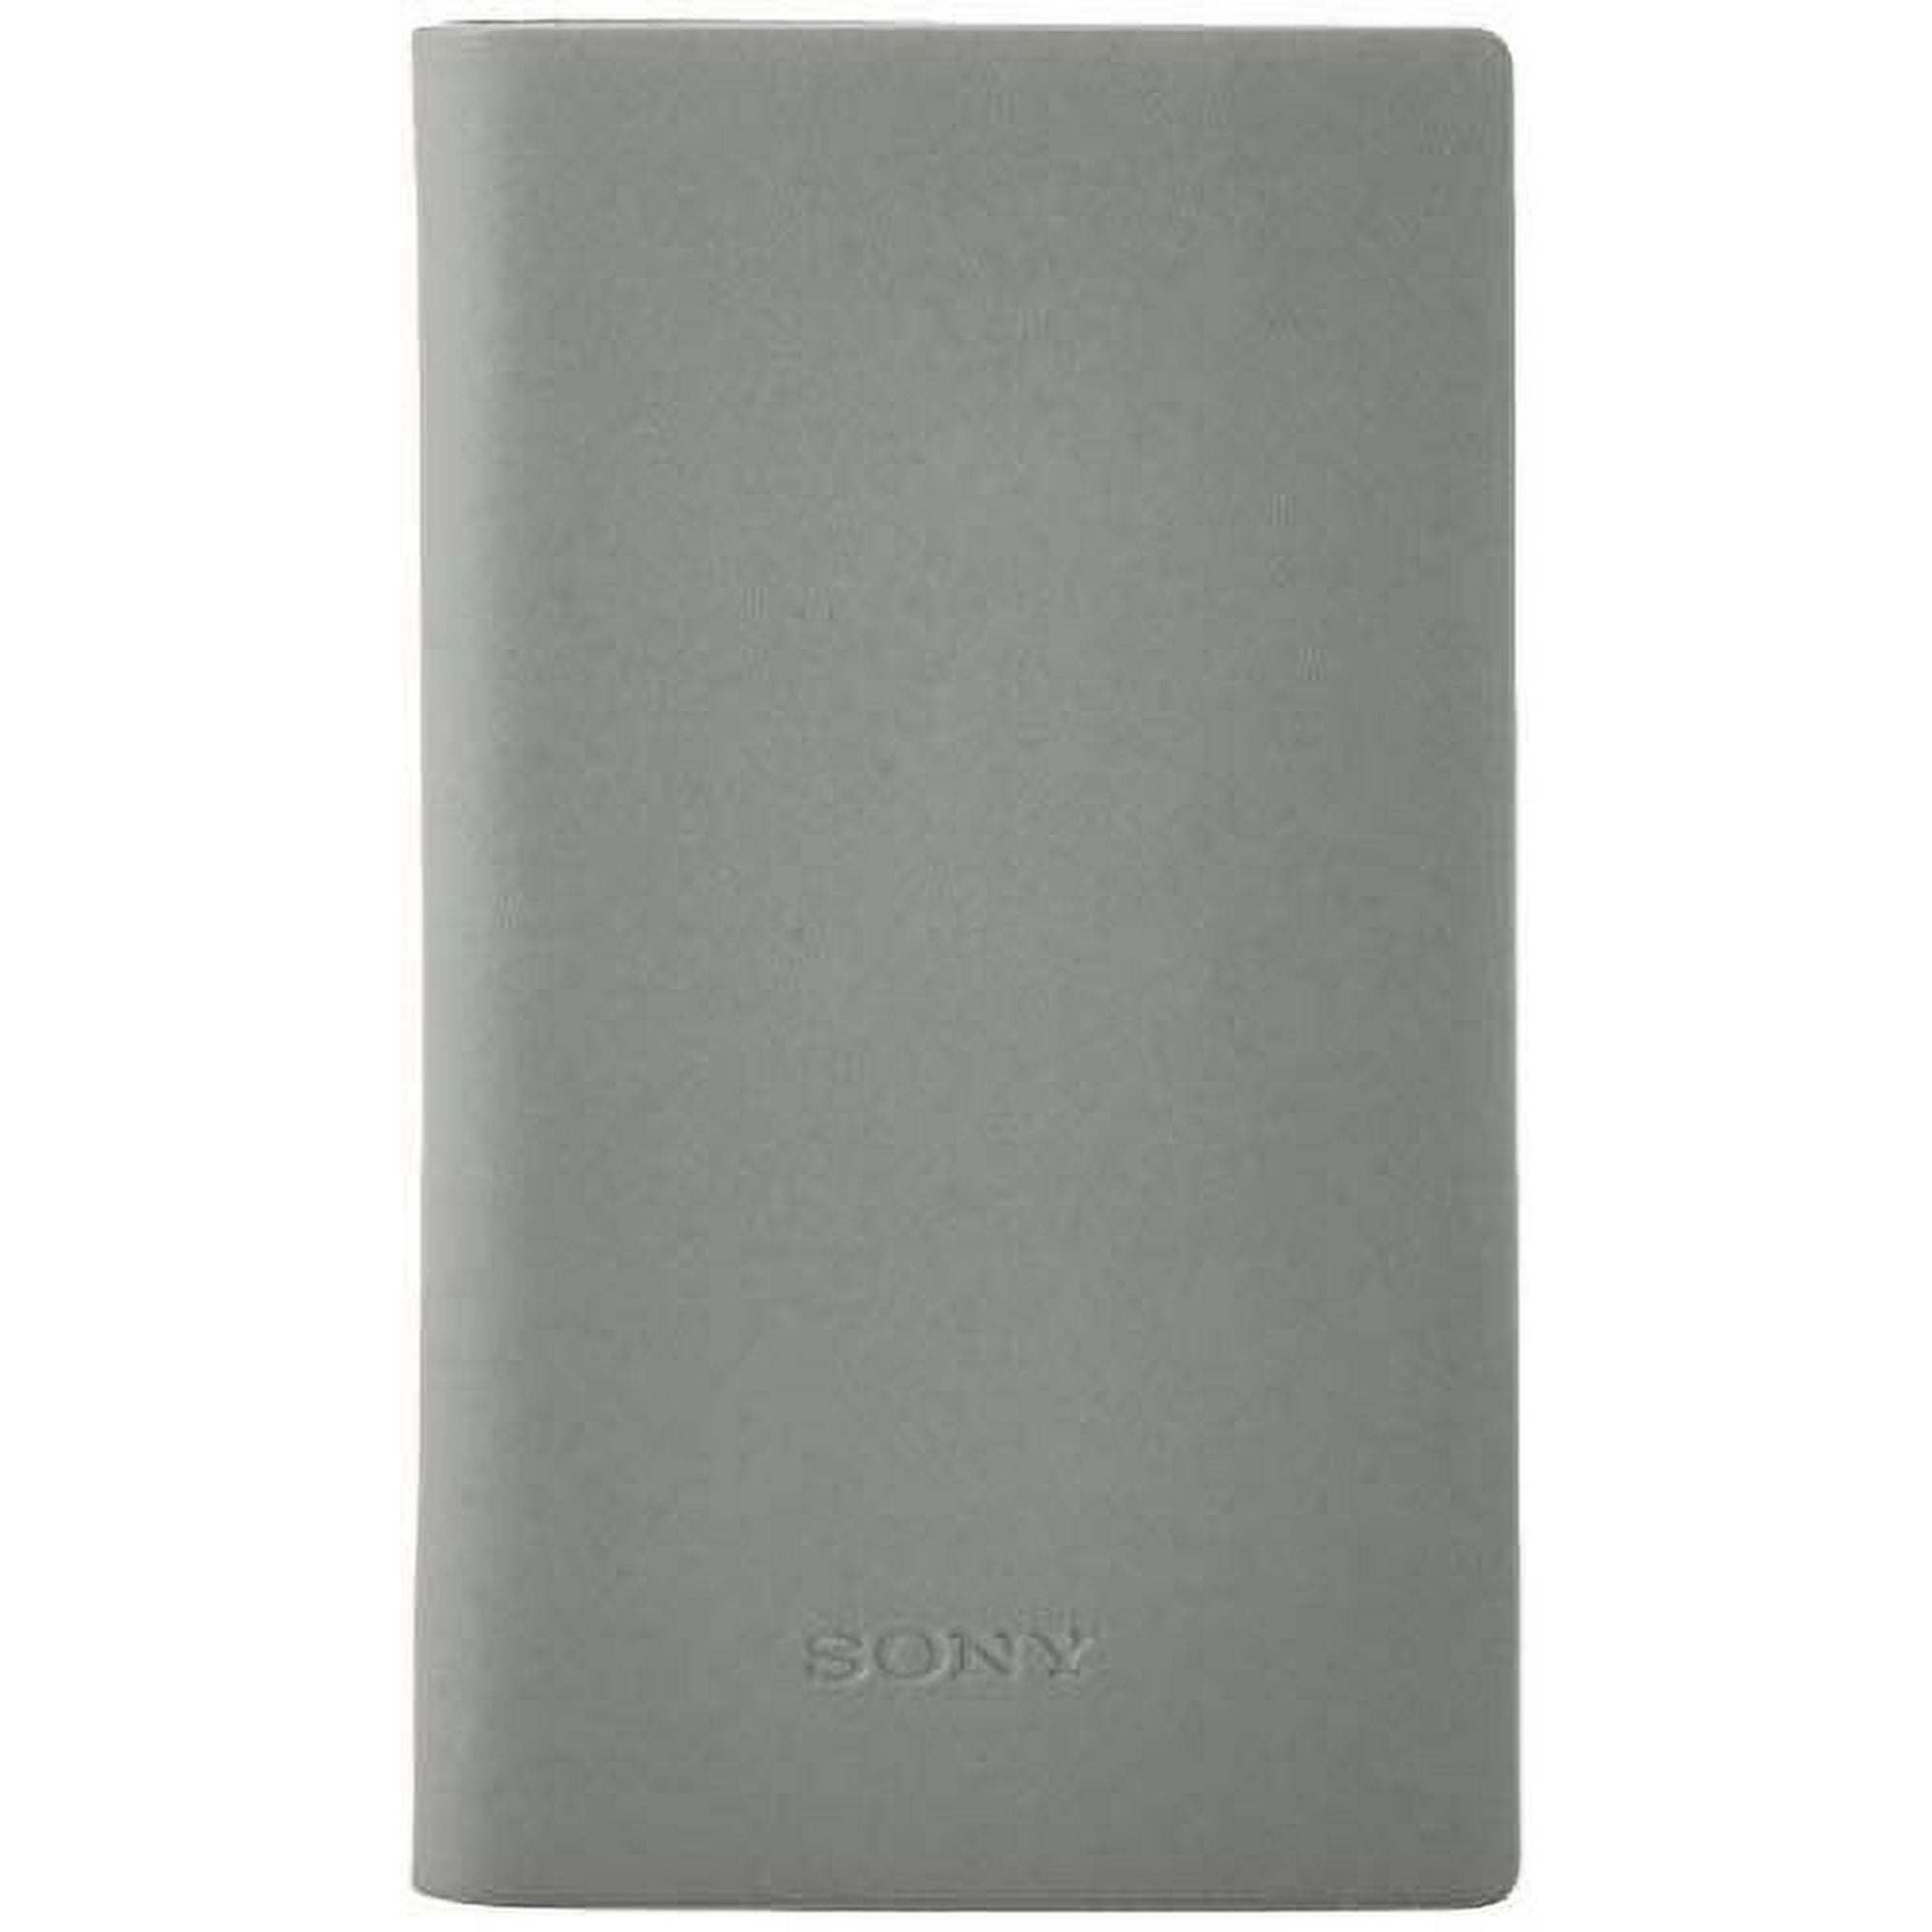 Sony Walkman genuine accessories For NW-A100 series only Soft case